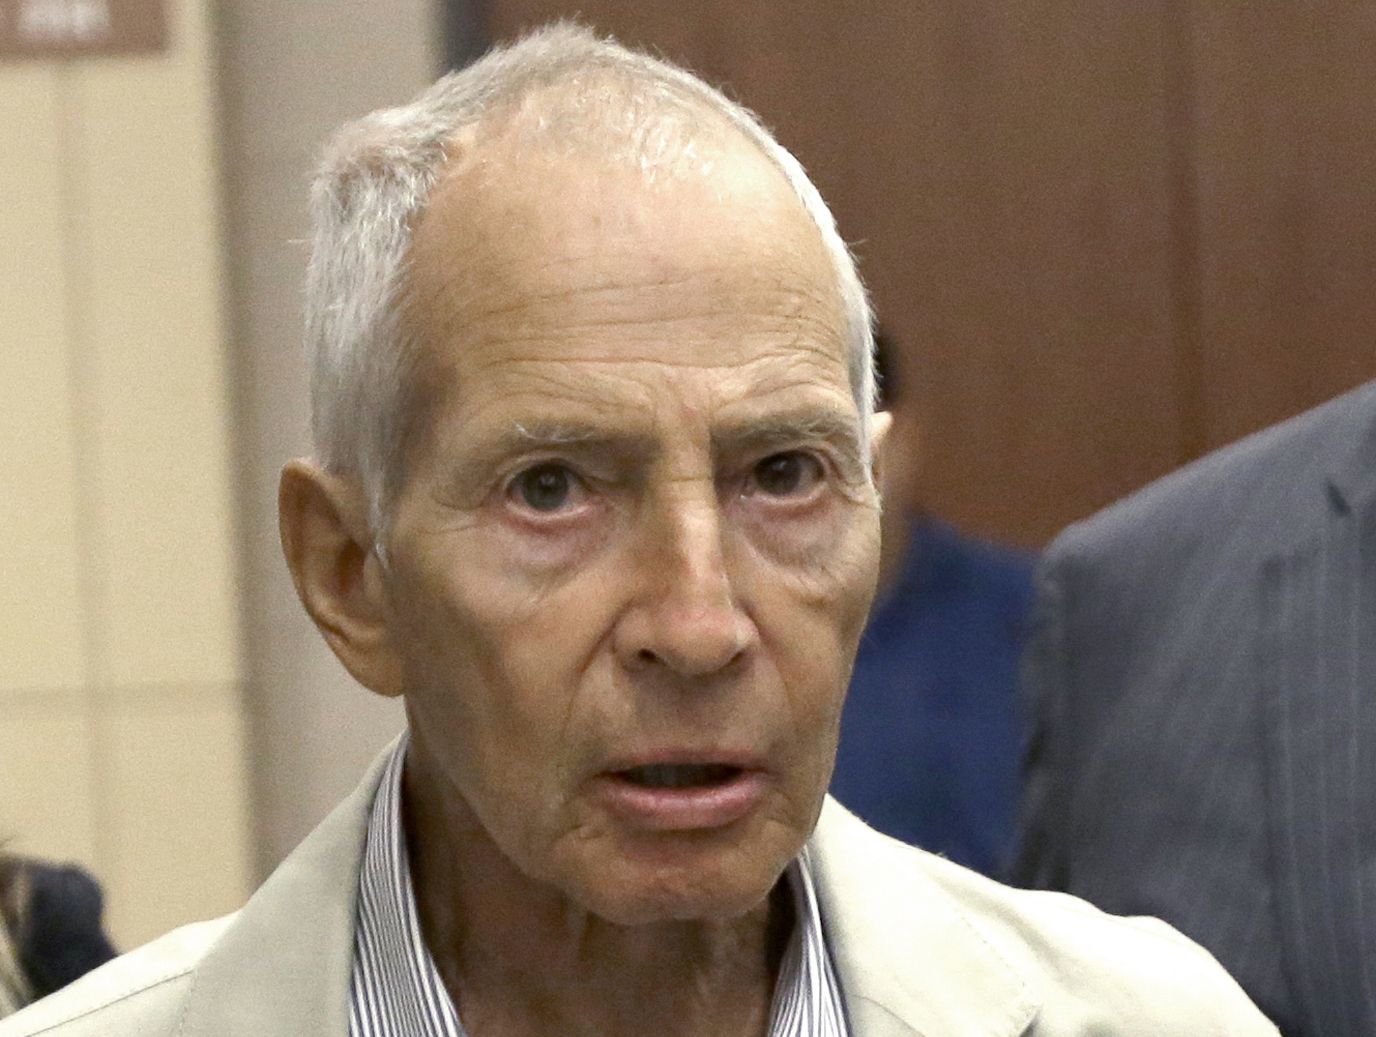 In this Aug. 15, 2014, photo, New York City real estate heir Robert Durst leaves a Houston courtroom. New Orleans Federal Judge Kurt Engelhardt on Wednesday approved a plea agreement for Durst to serve 7 years, 1 month in prison on a weapons charge. Durst still faces a separate murder charge in California.